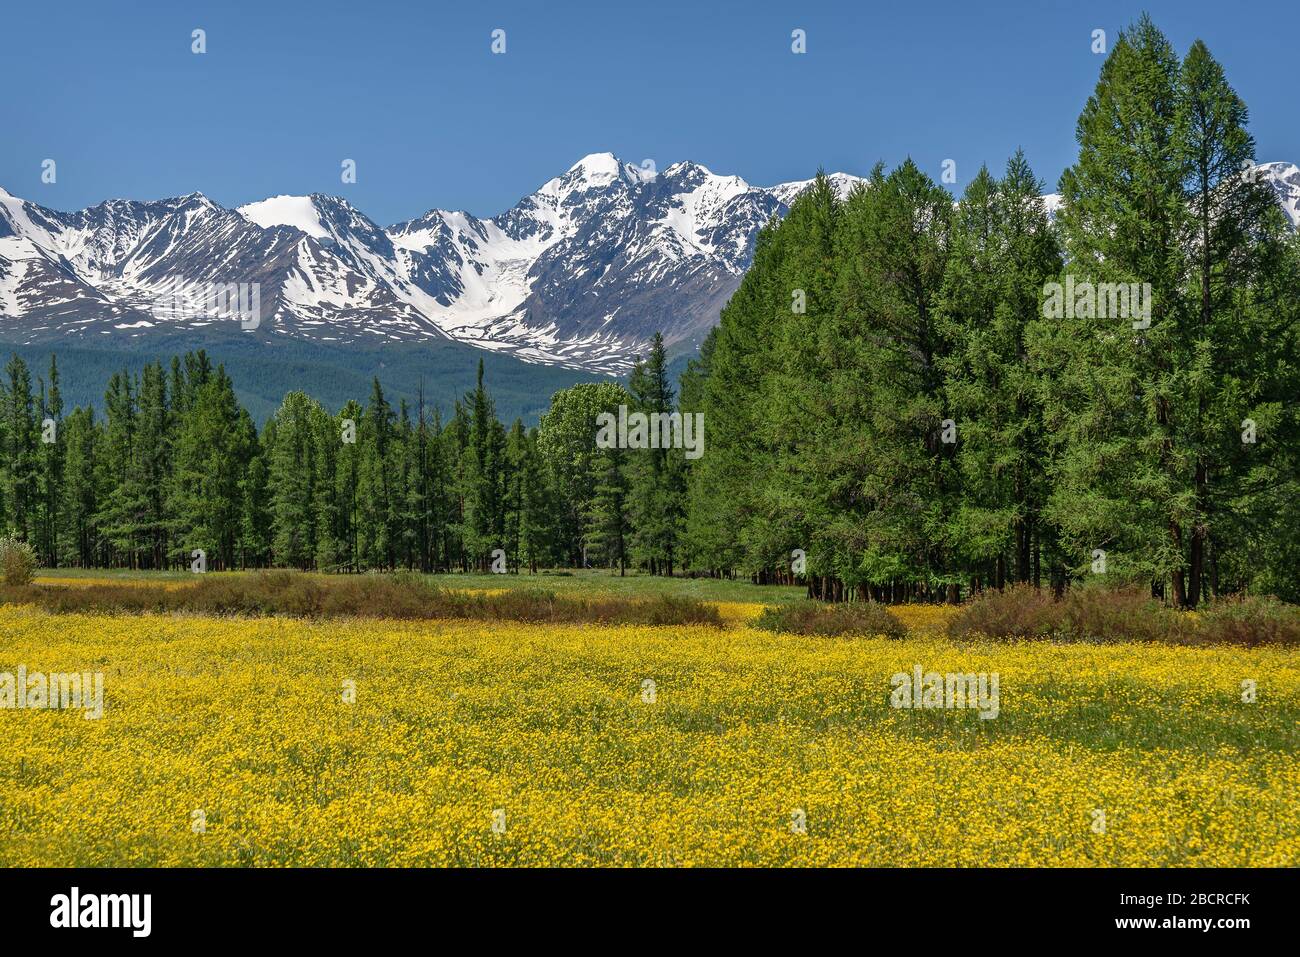 Amazing summer landscape with bright yellow flowers of buttercups (Ranunculus) on a green meadow against the backdrop of snowy mountains, forest and b Stock Photo